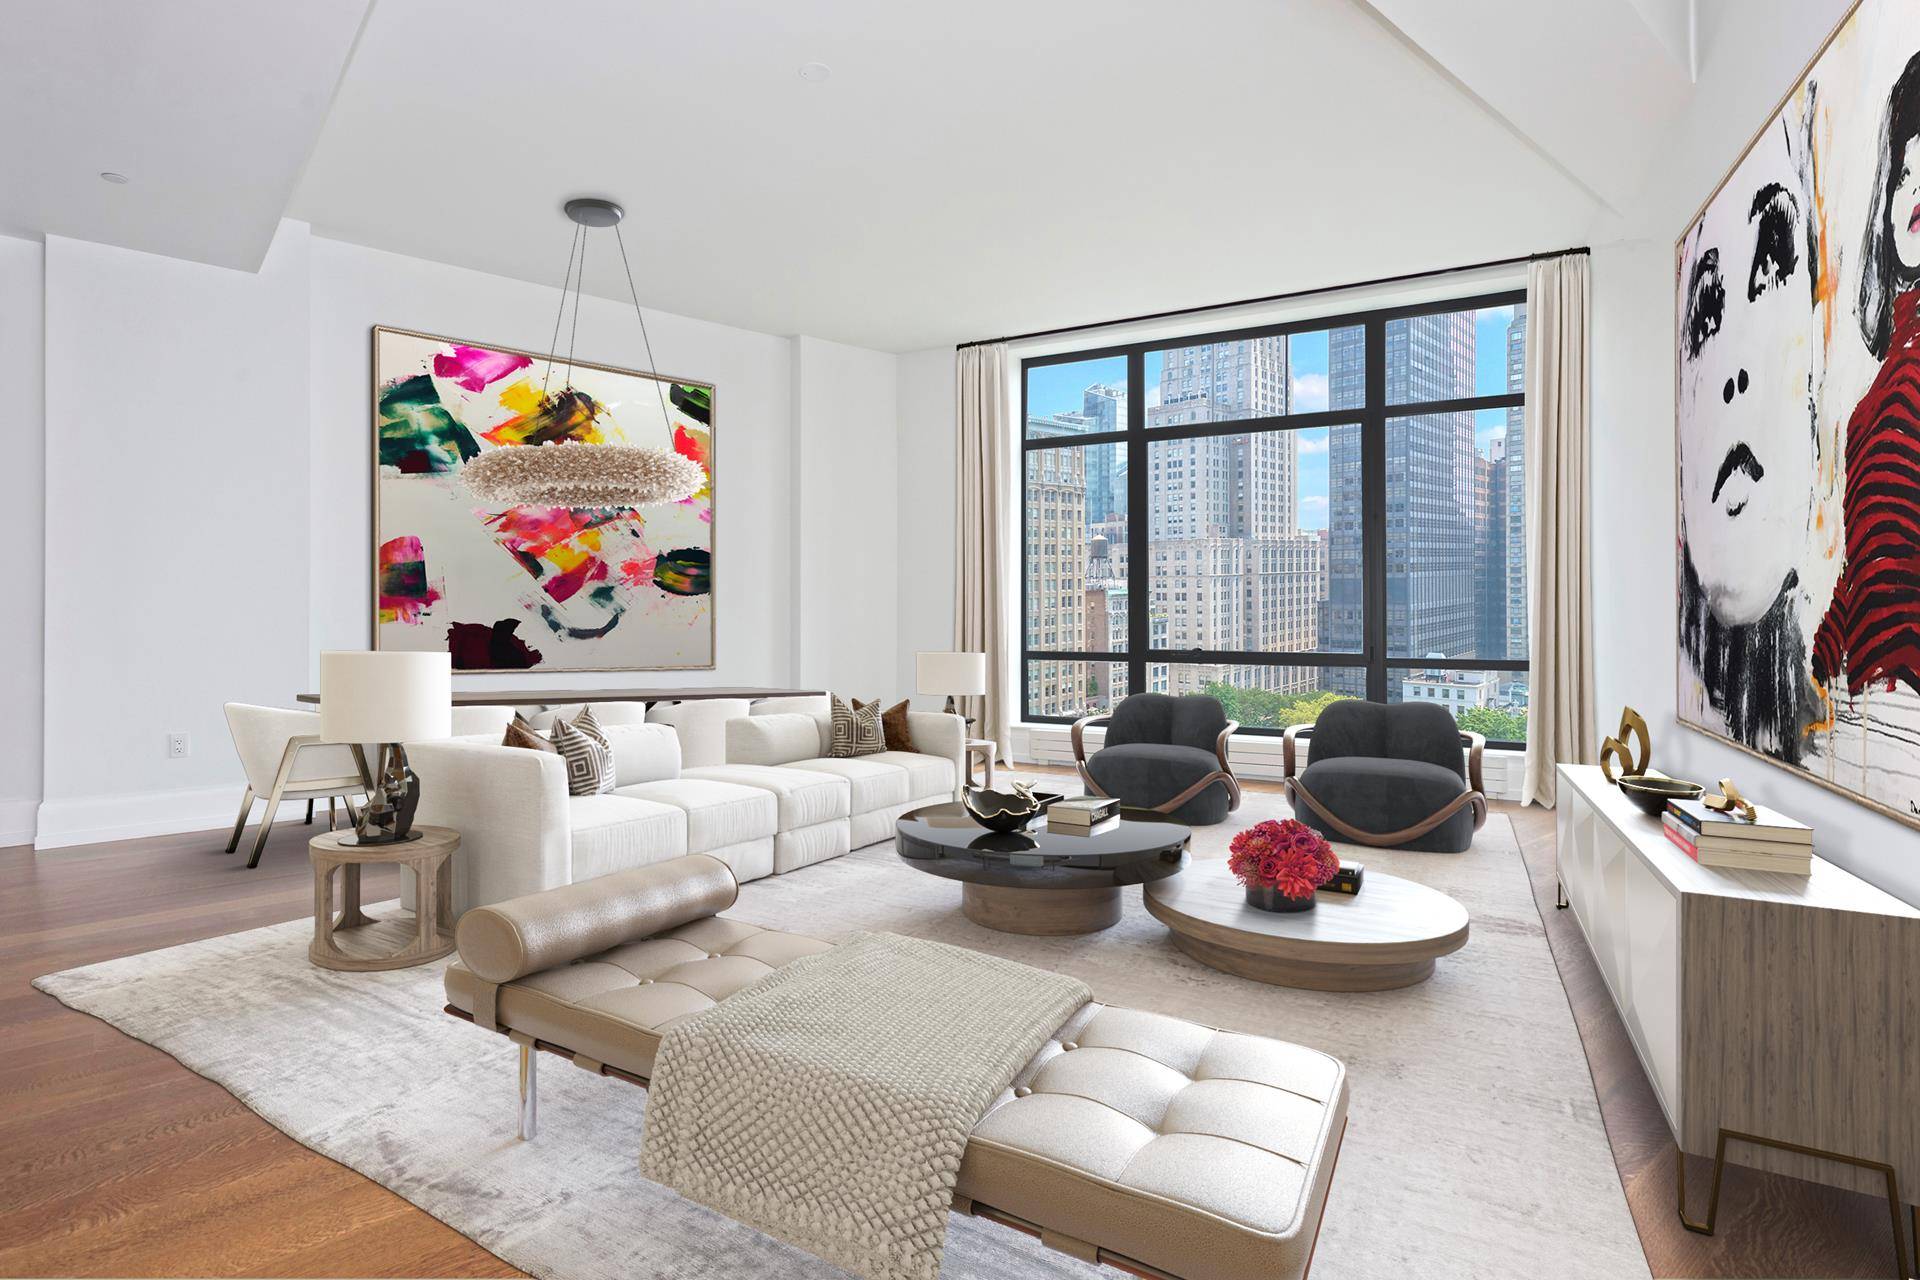 Stunning 4 bedroom, 4. 5 bath home with Park Views, located in the coveted 10 Madison Square West Condominium.